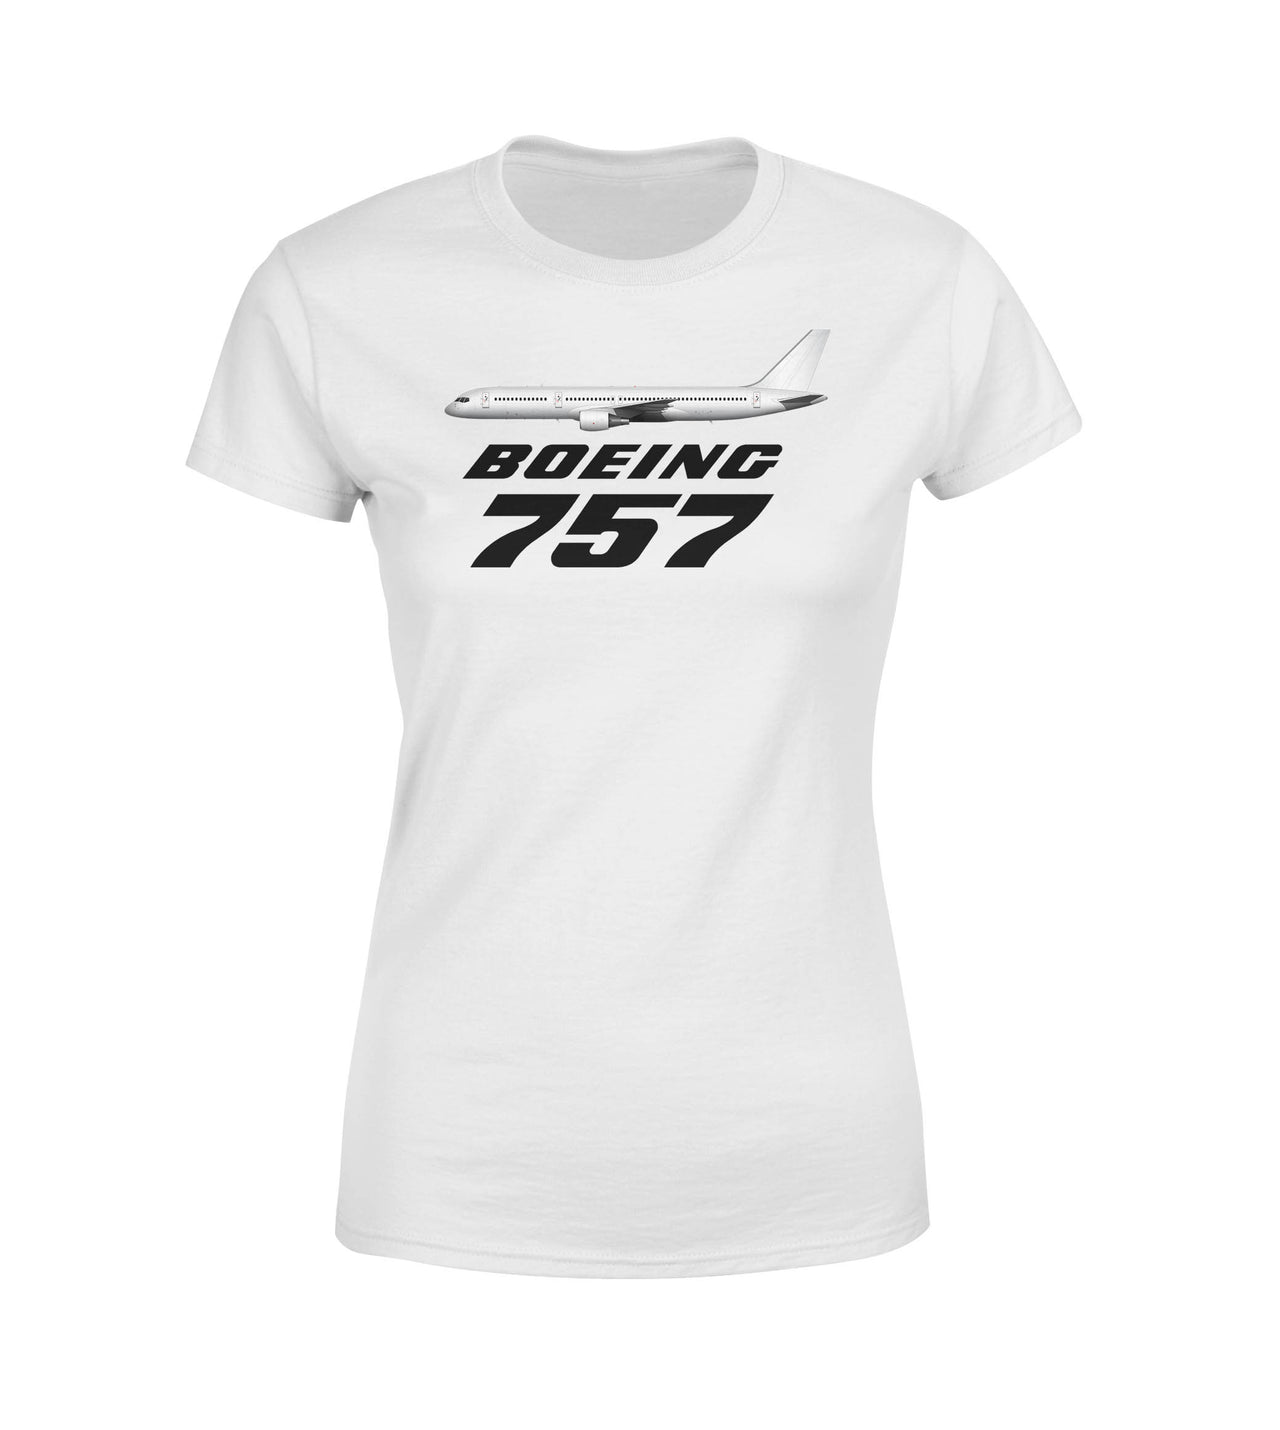 The Boeing 757 Designed Women T-Shirts